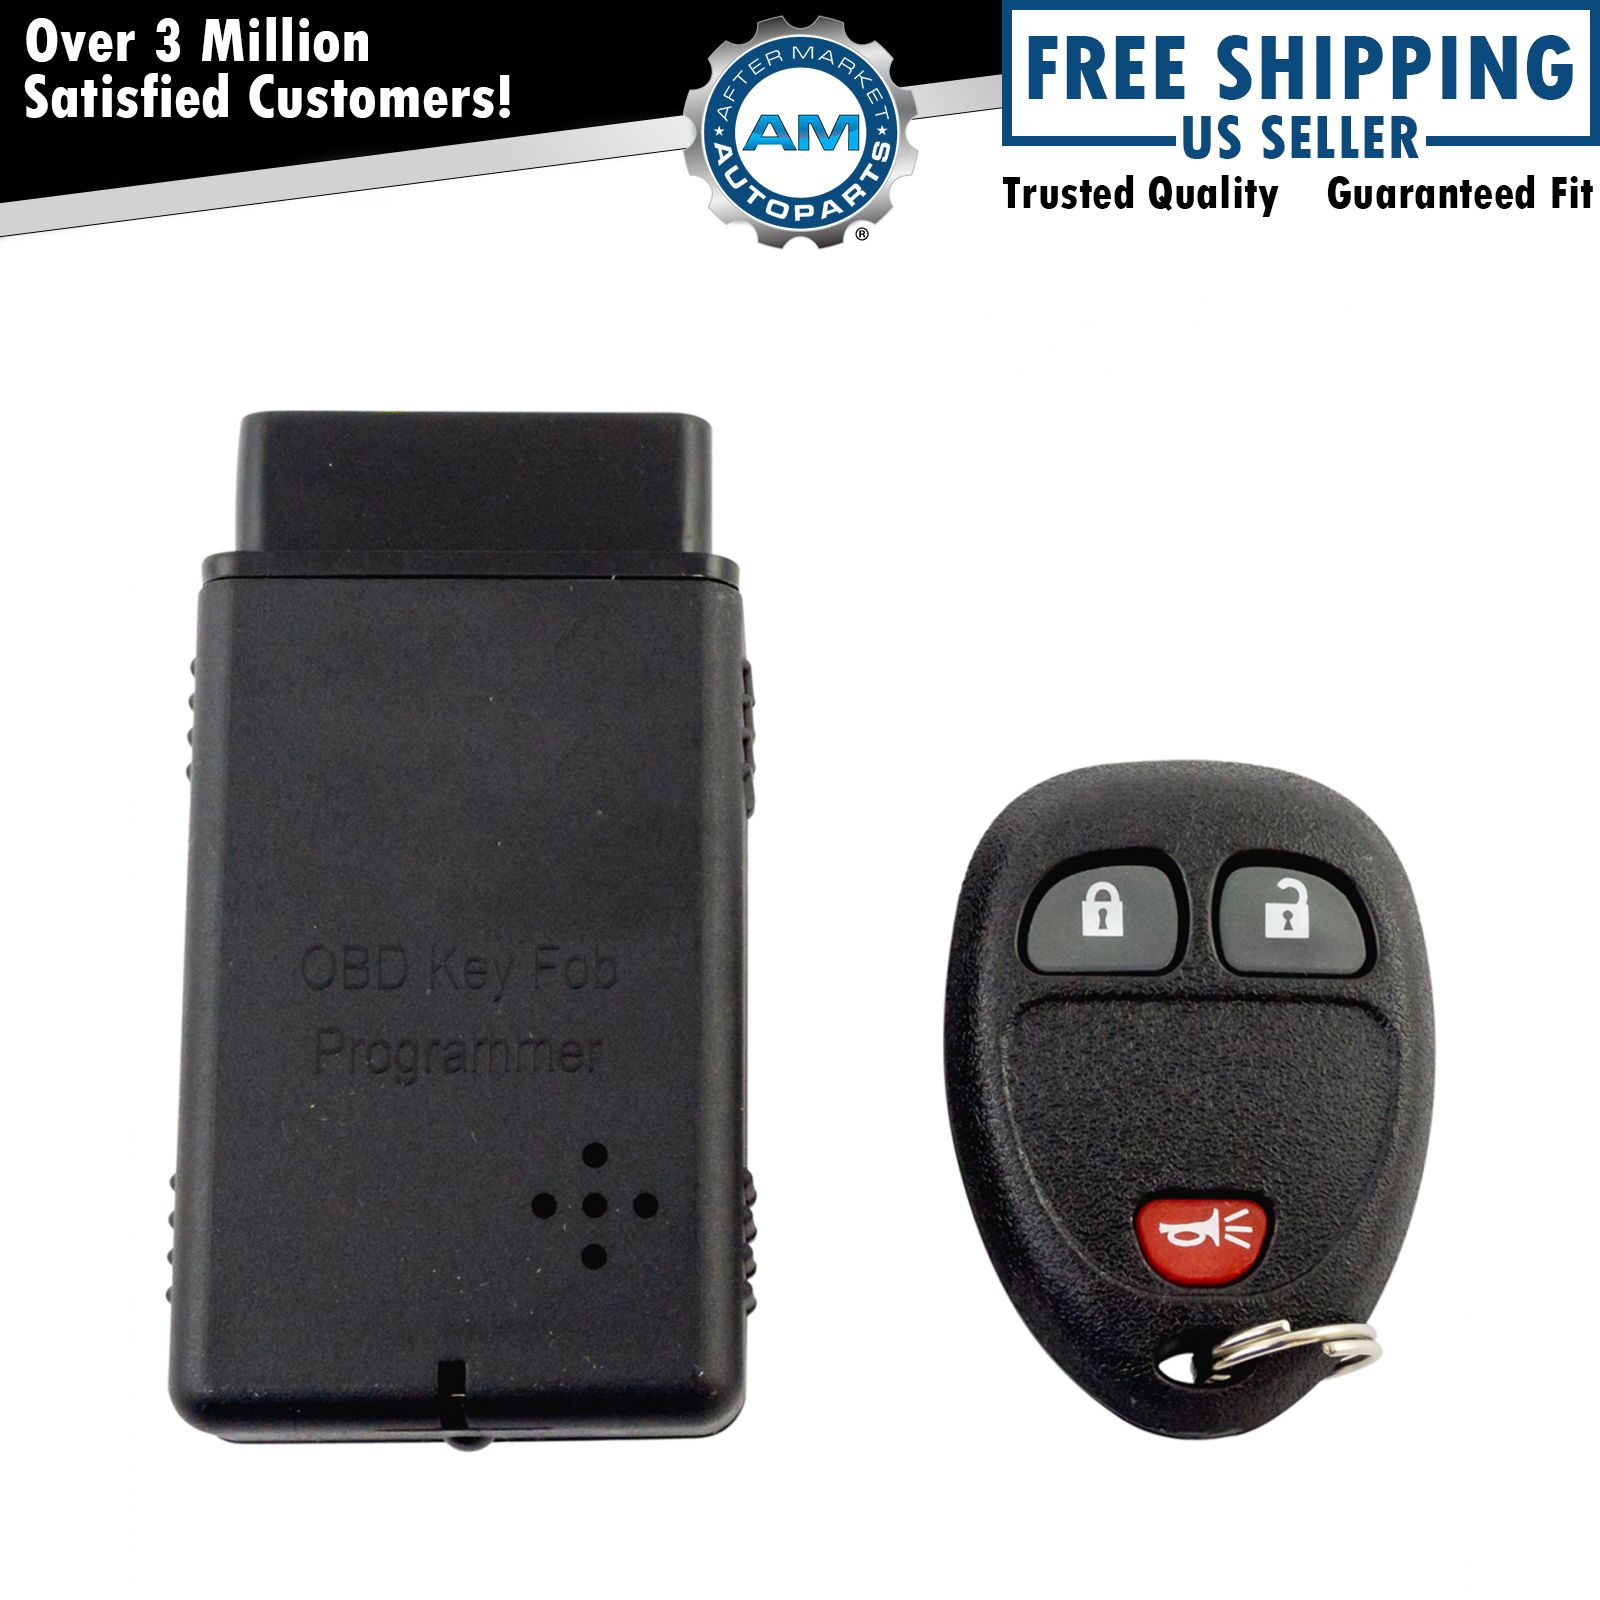 Dorman 99161 3 Button Keyless Entry Remote with Programmer for GM Truck SUV New